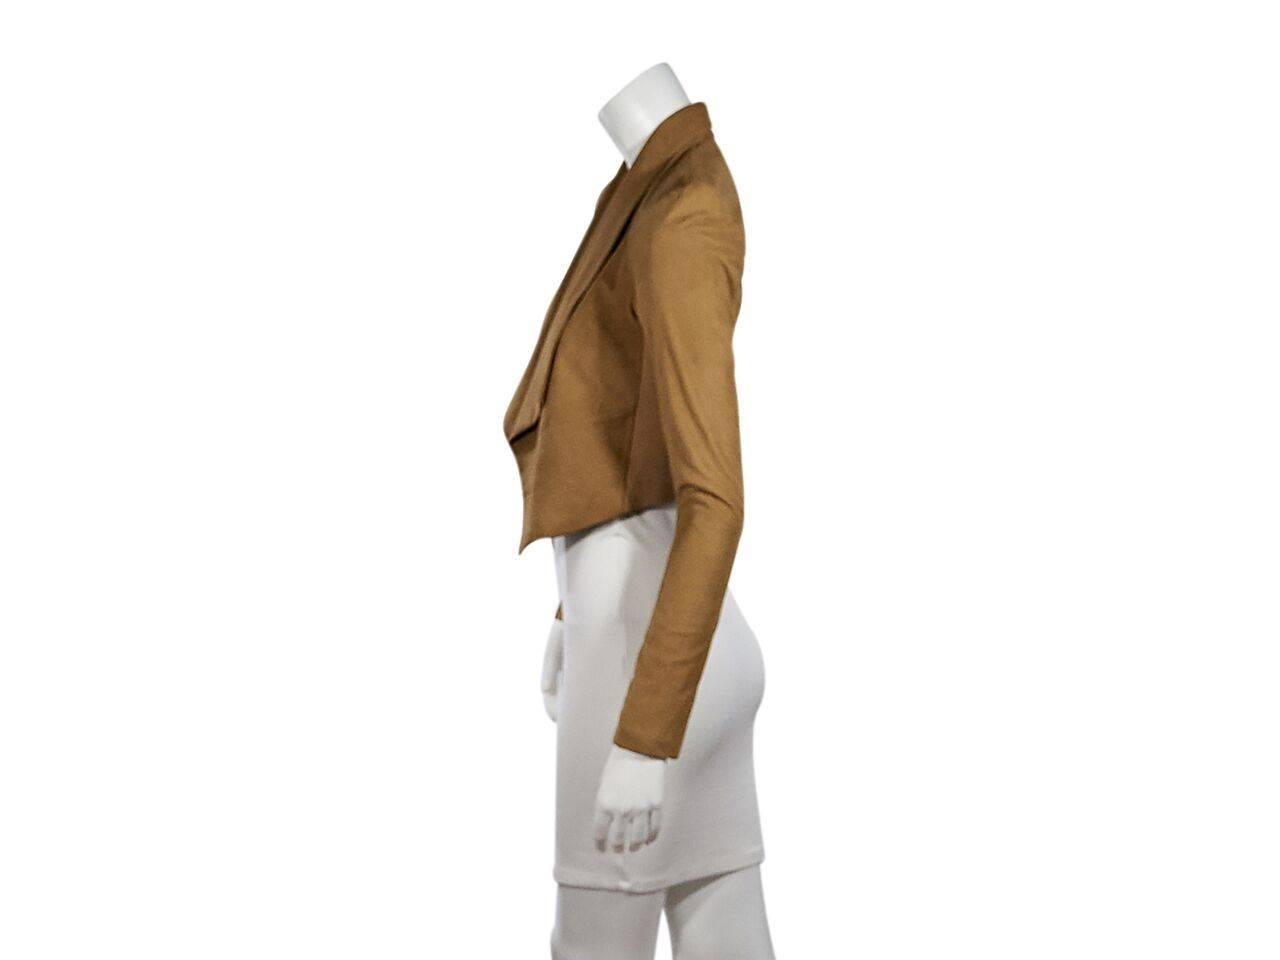 Product details:  Tan suede jacket by Alice + Olivia.  Long sleeves.  Draped open front.  
Condition: Pre-owned. New with tags.
Est. Retail $ 898.00